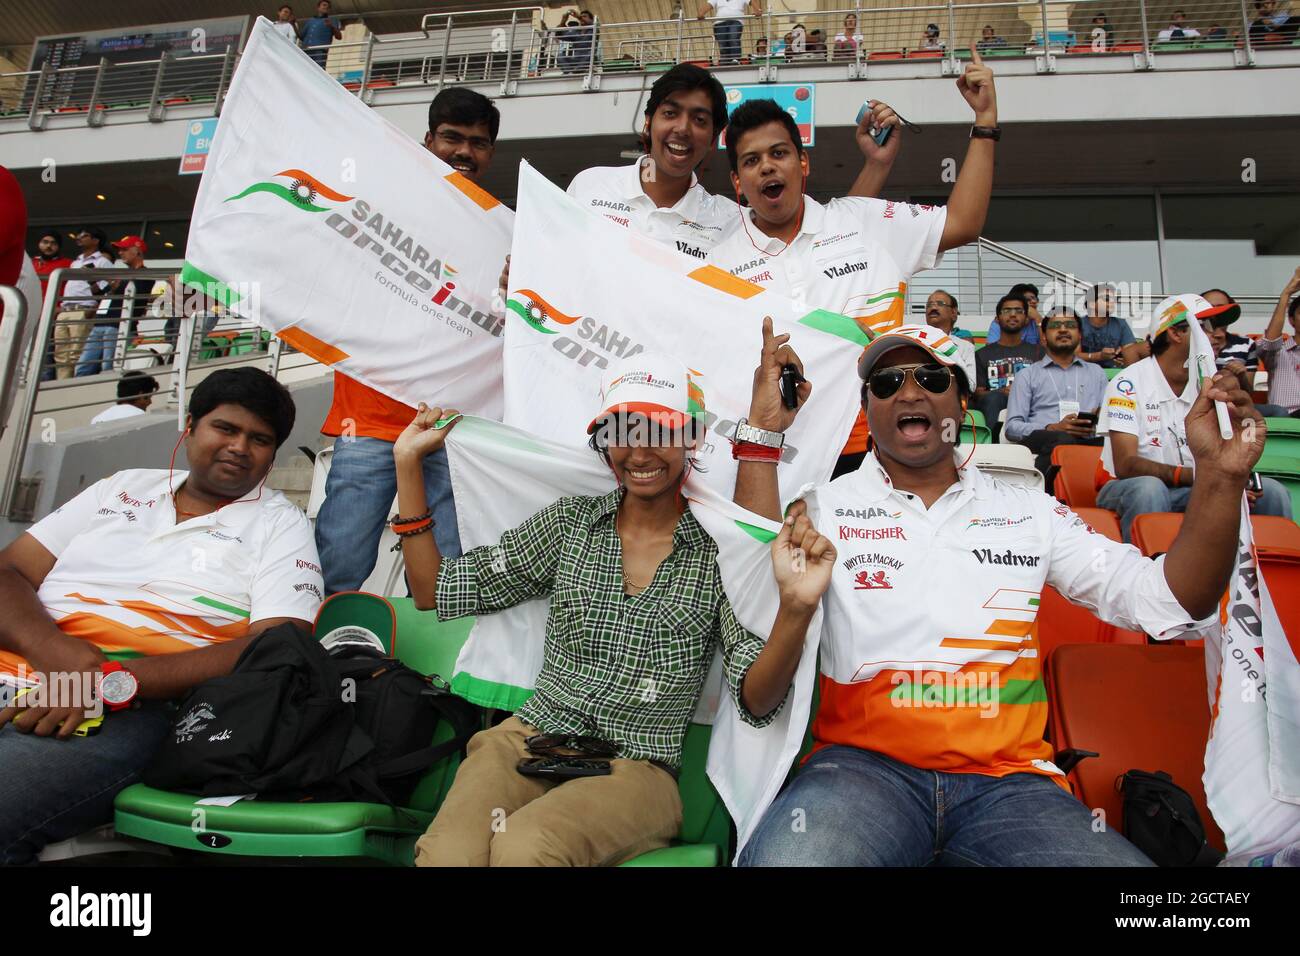 Sahara Force India F1 Team fans in the grandstand. Indian Grand Prix, Saturday 26th October 2013. Greater Noida, New Delhi, India. Stock Photo